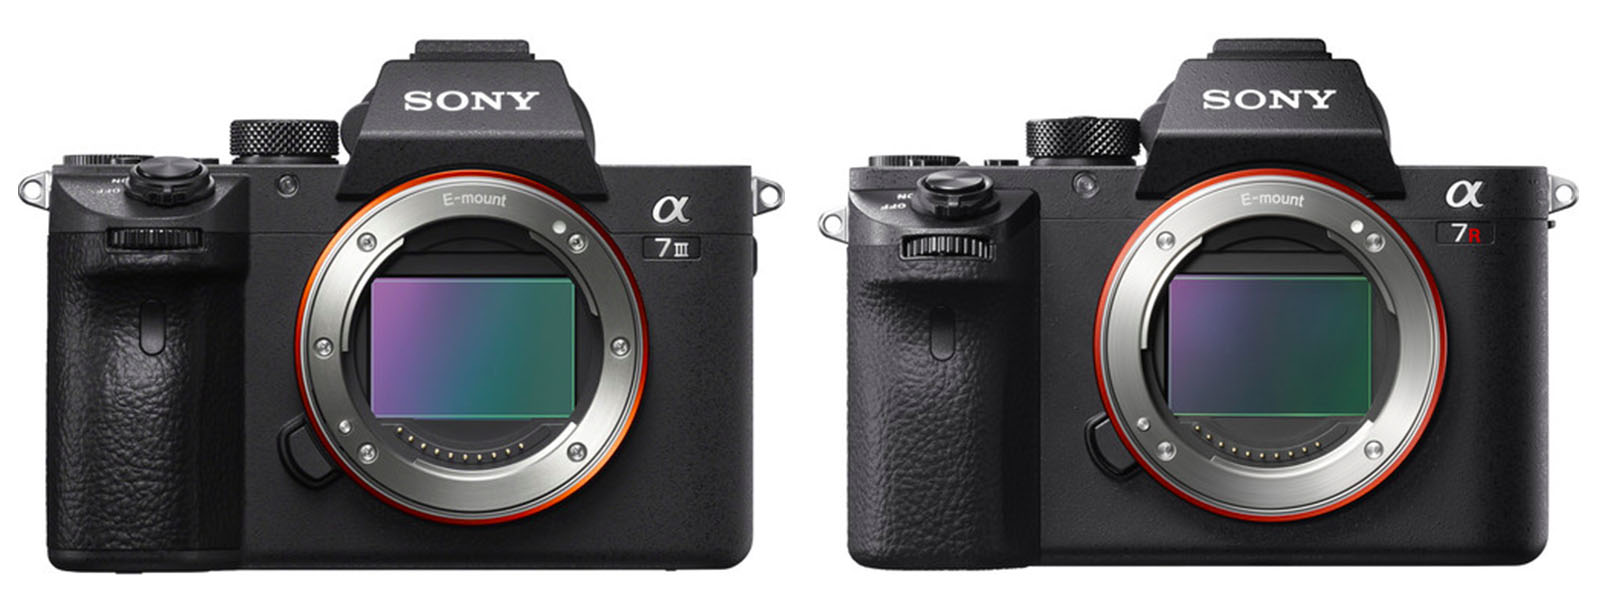 sony a7iii vs a7rii front